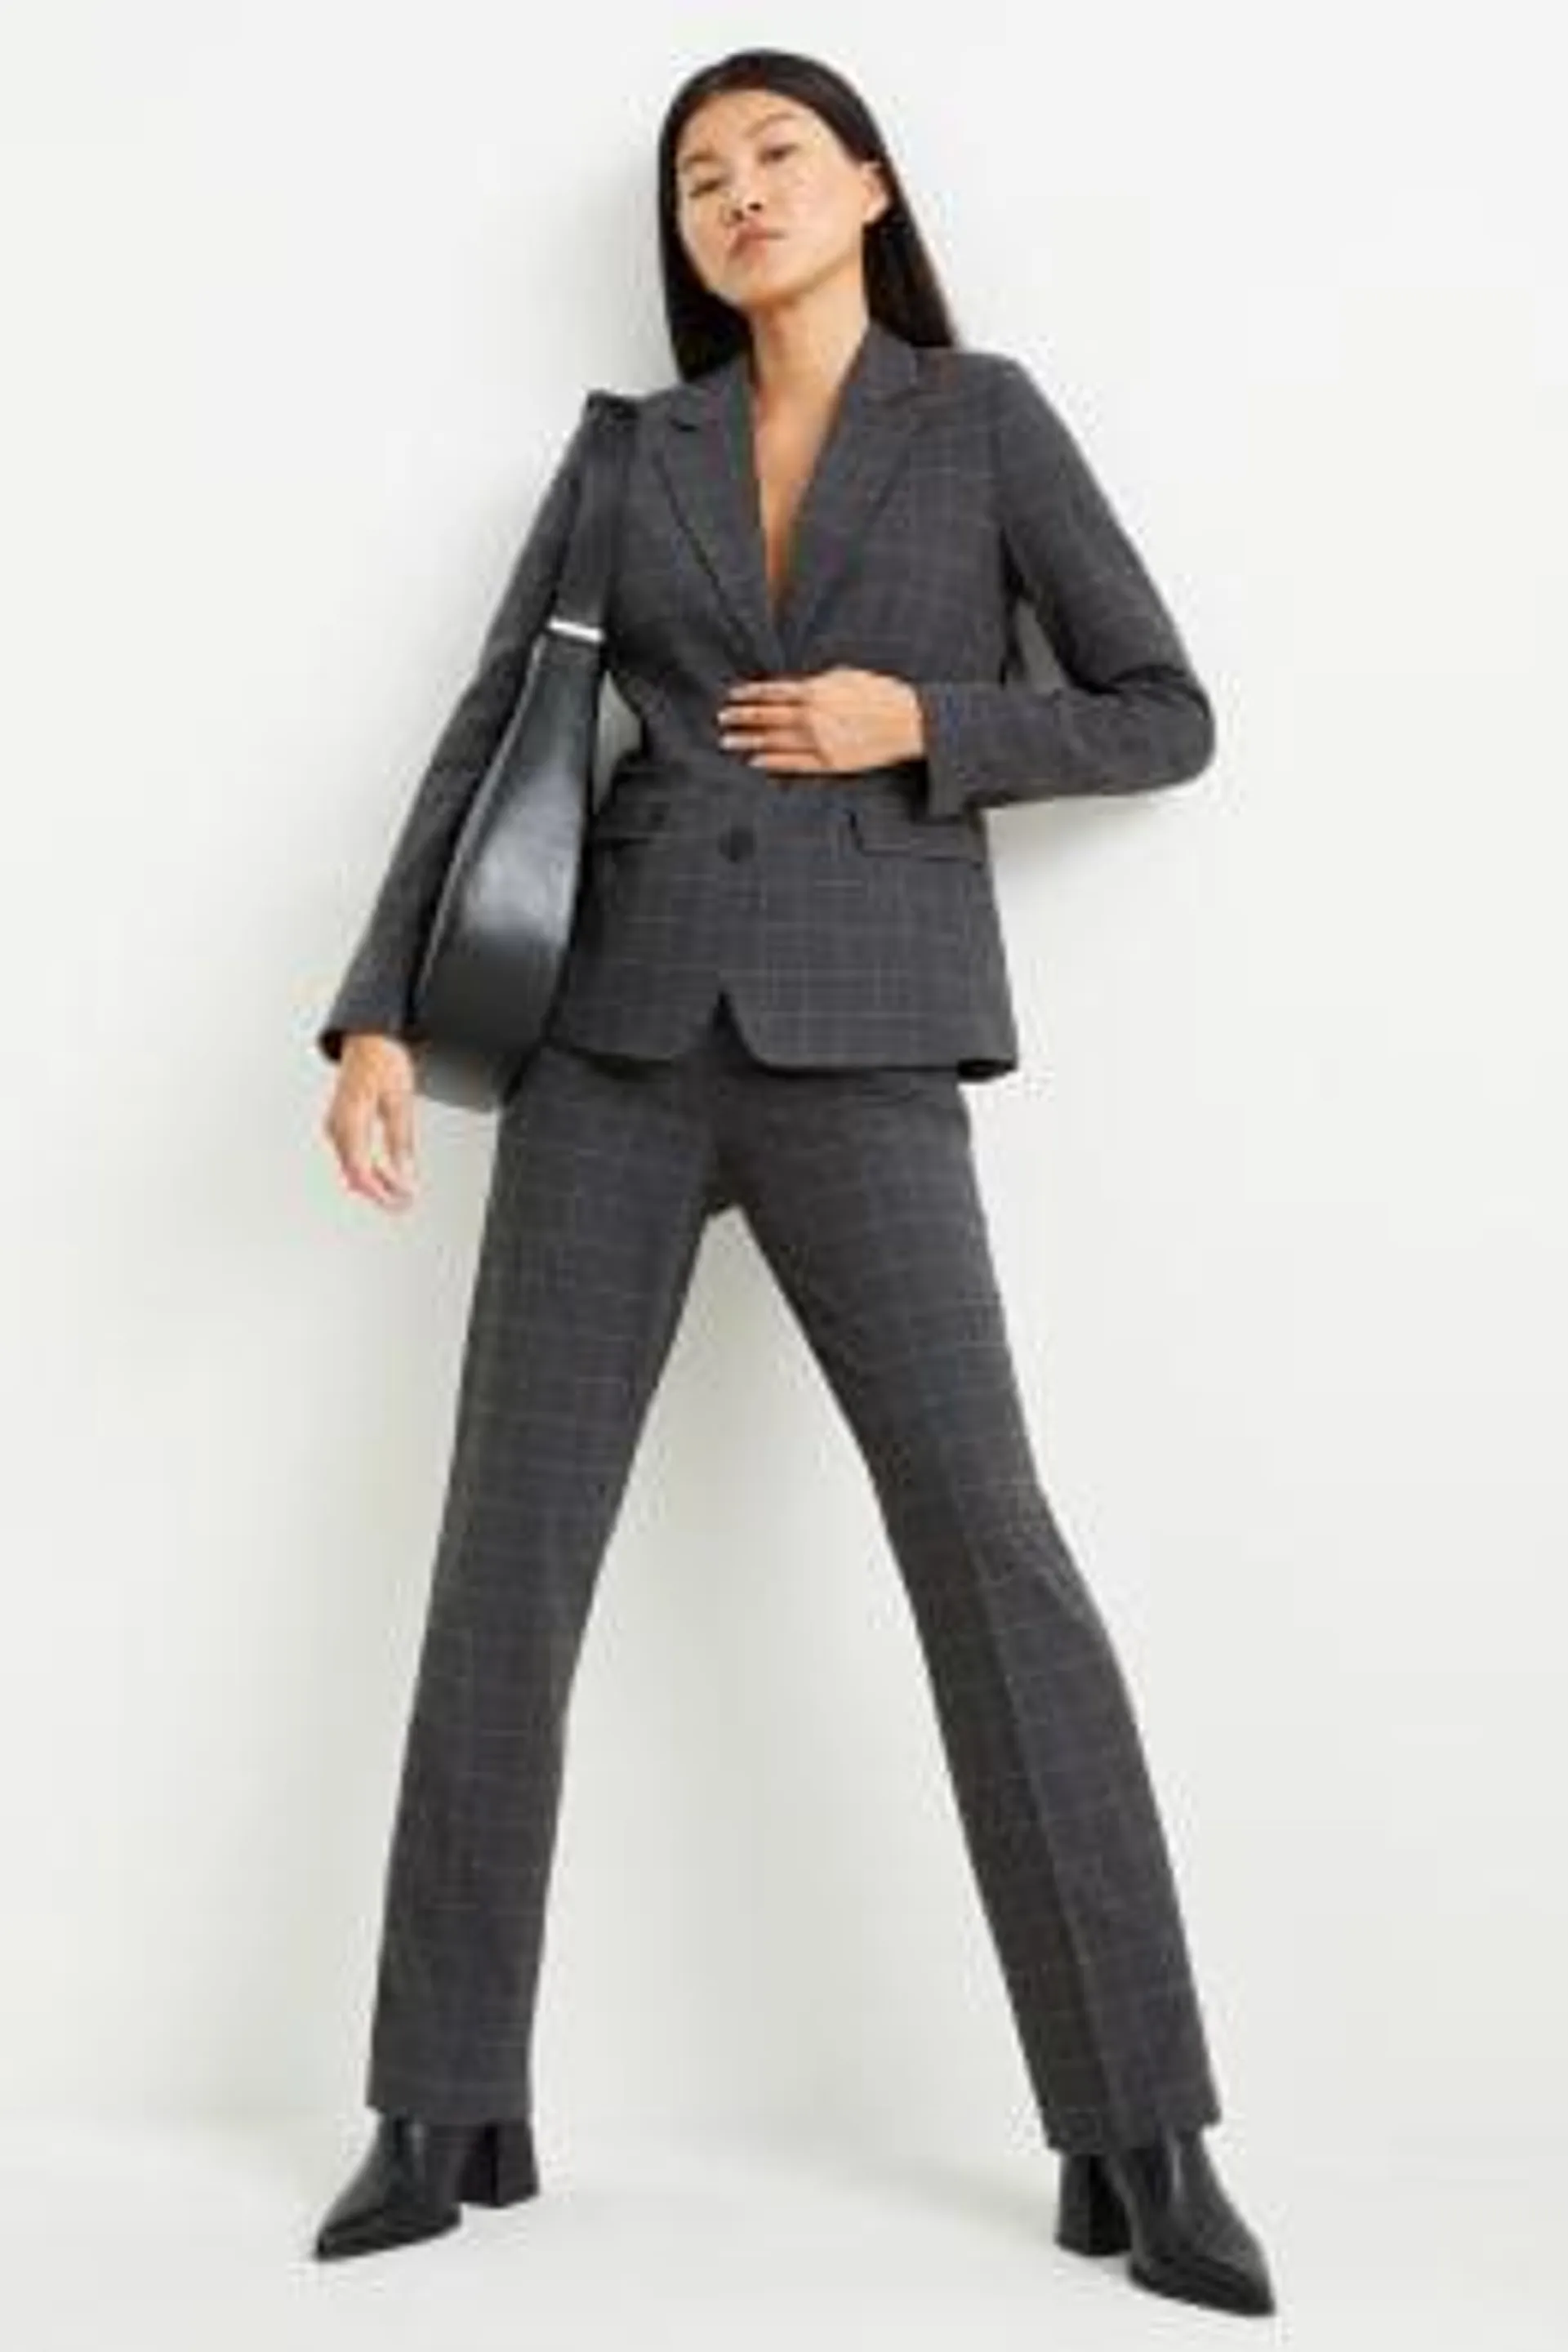 Business cloth trousers - mid-rise waist - straight fit